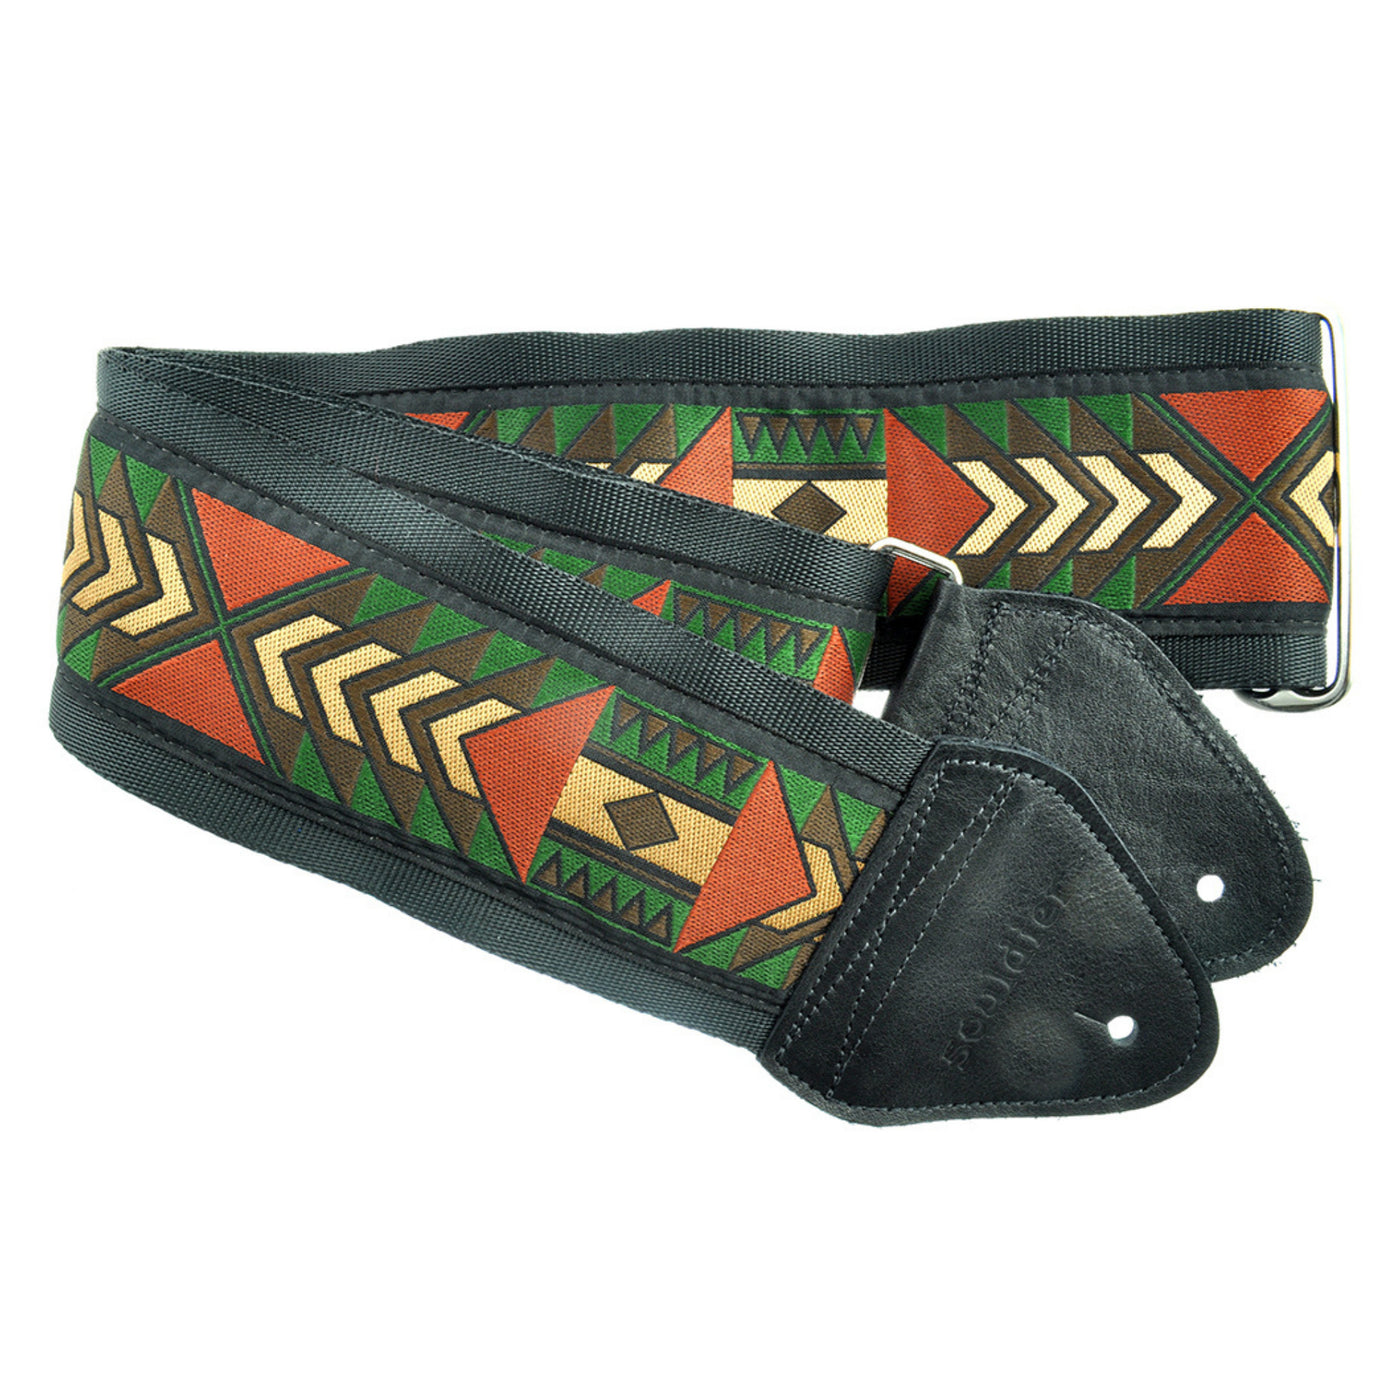 Souldier GT0784BK02BK - Handmade Souldier Fabric Bass Strap, 3 Inches Wide and Adjustable from 33" to 60" Made in the USA, Tigard